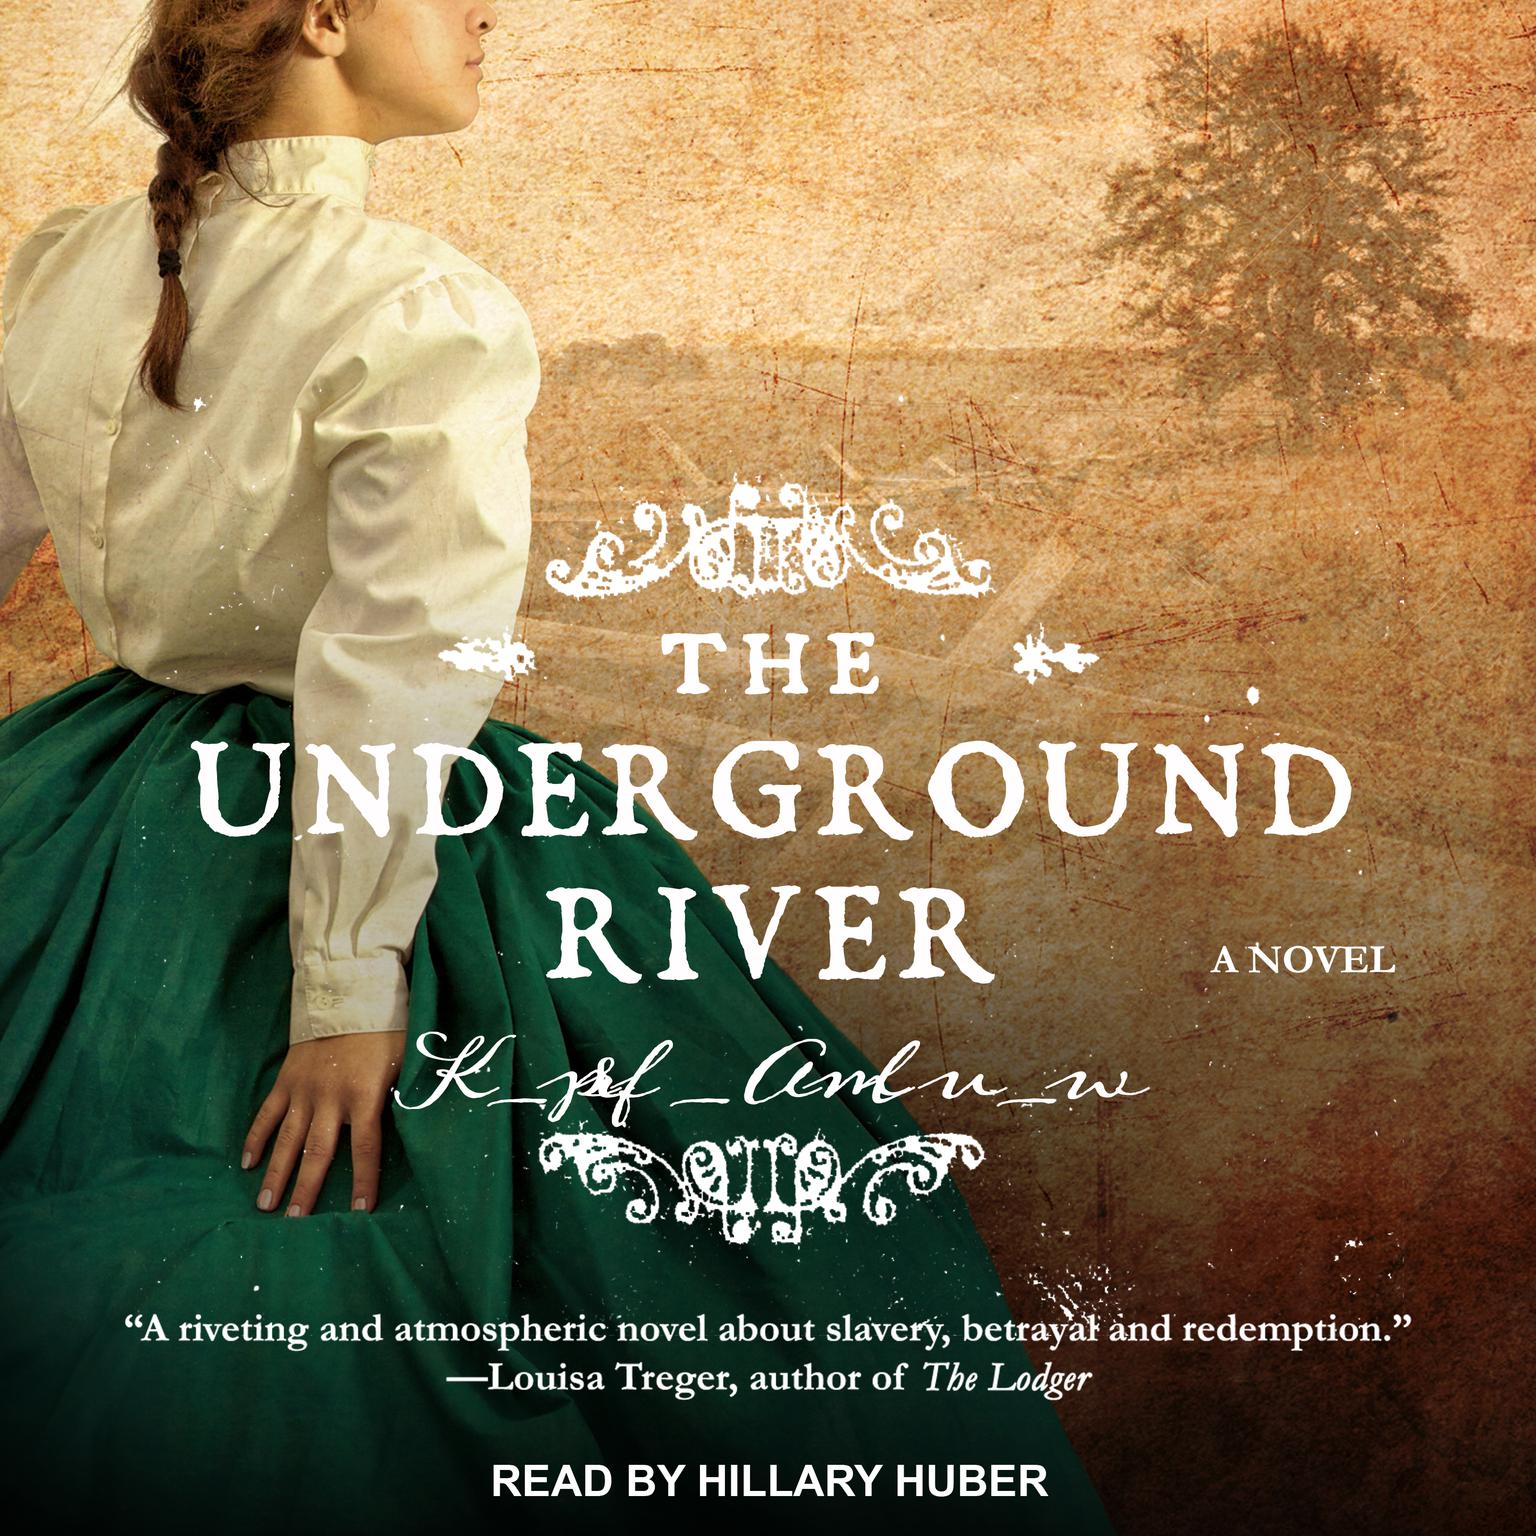 The Underground River: A Novel Audiobook, by Martha Conway